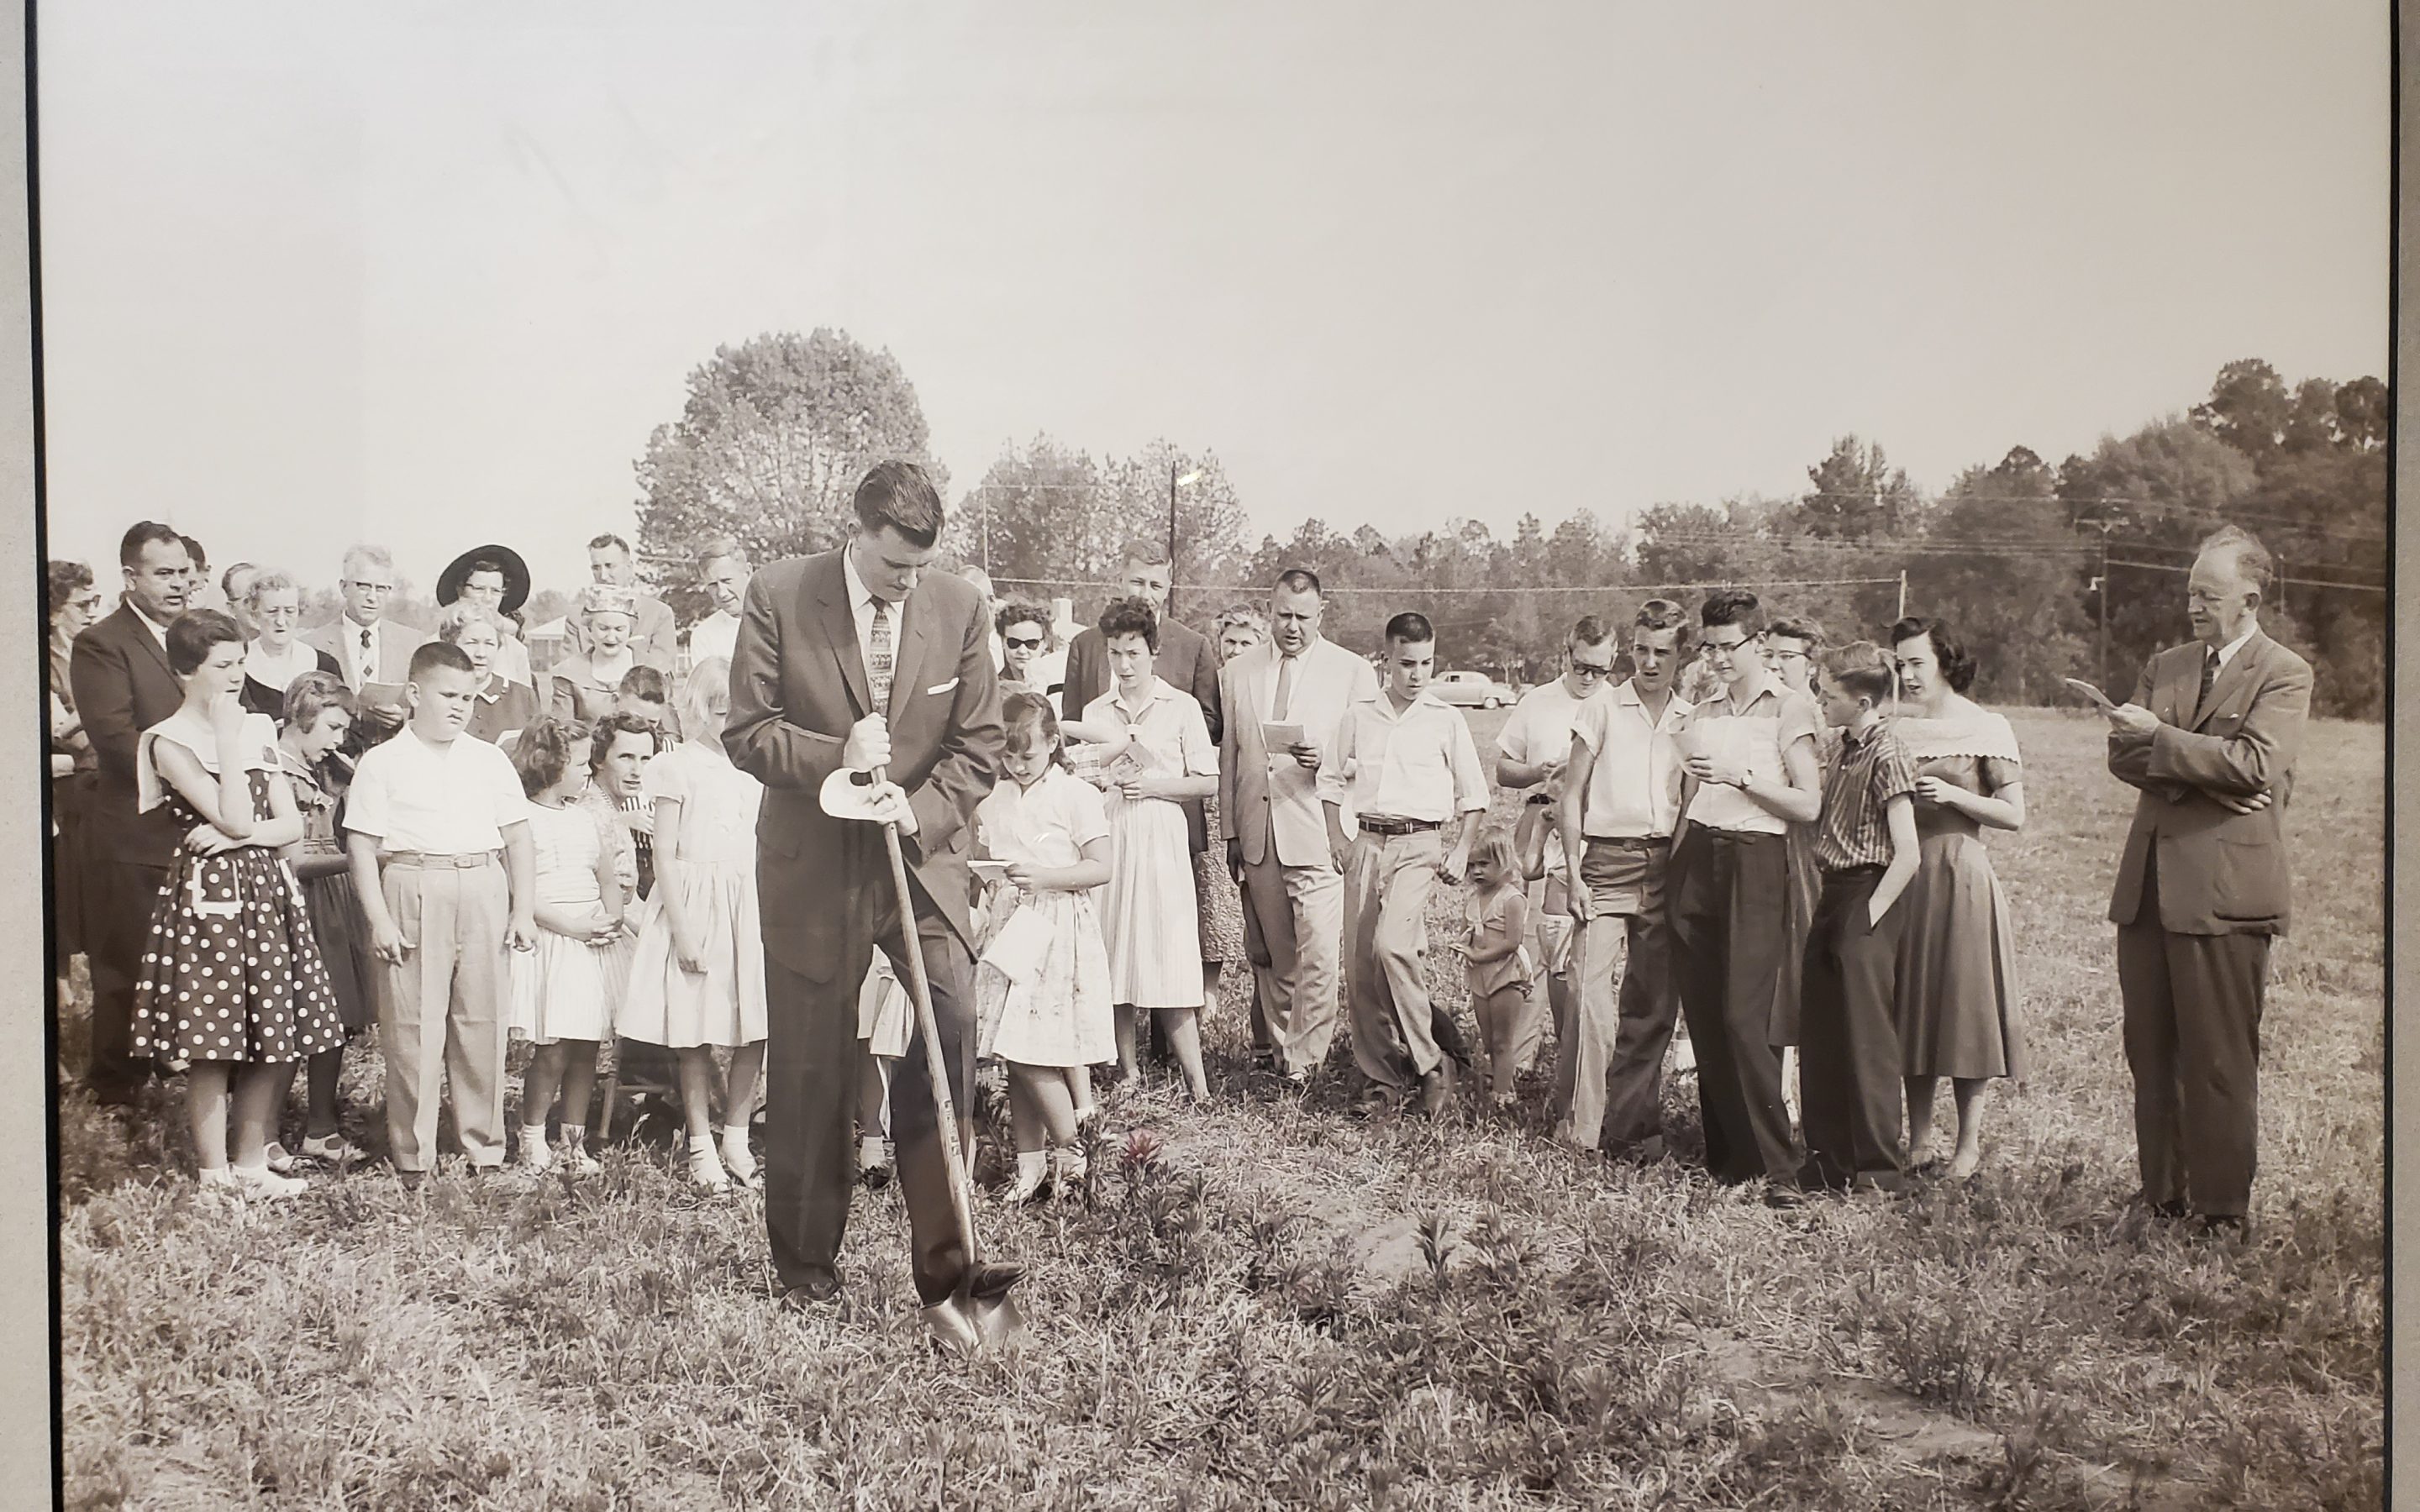 A group of people looks on as a man holds a shovel in a field